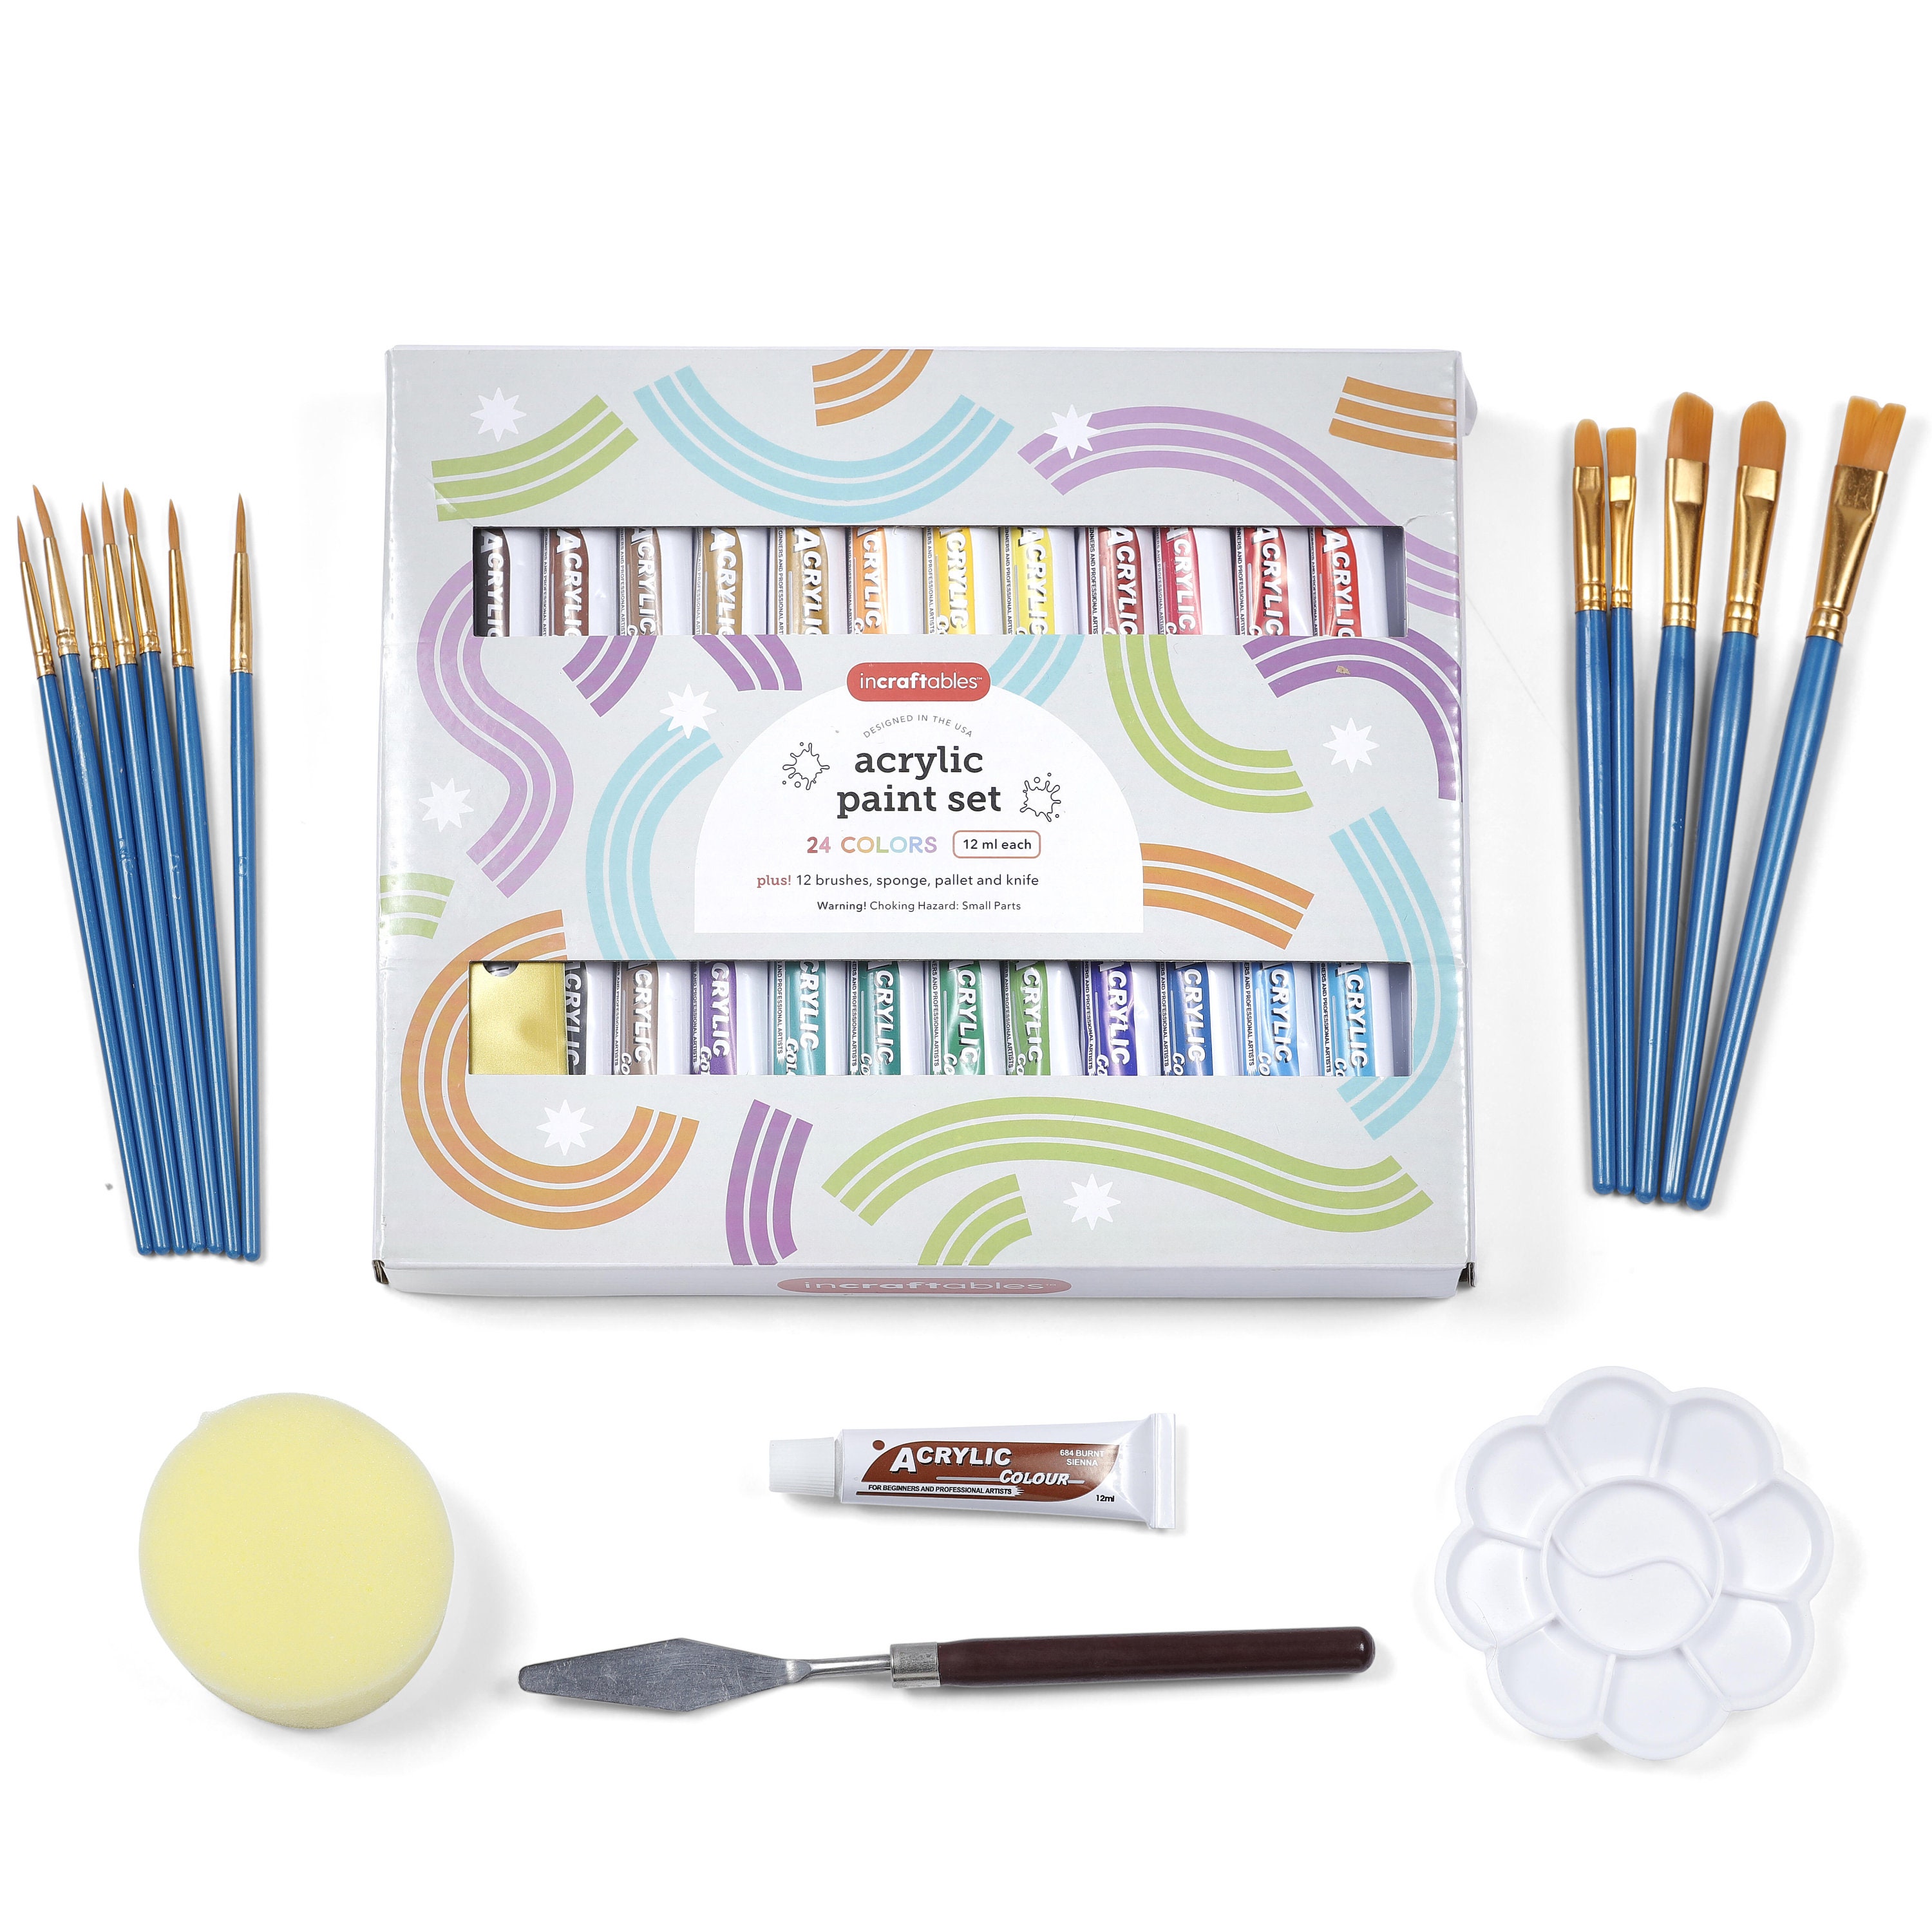 Incraftables Canvas and Paint Set for Adults. Acrylic Painting Kit